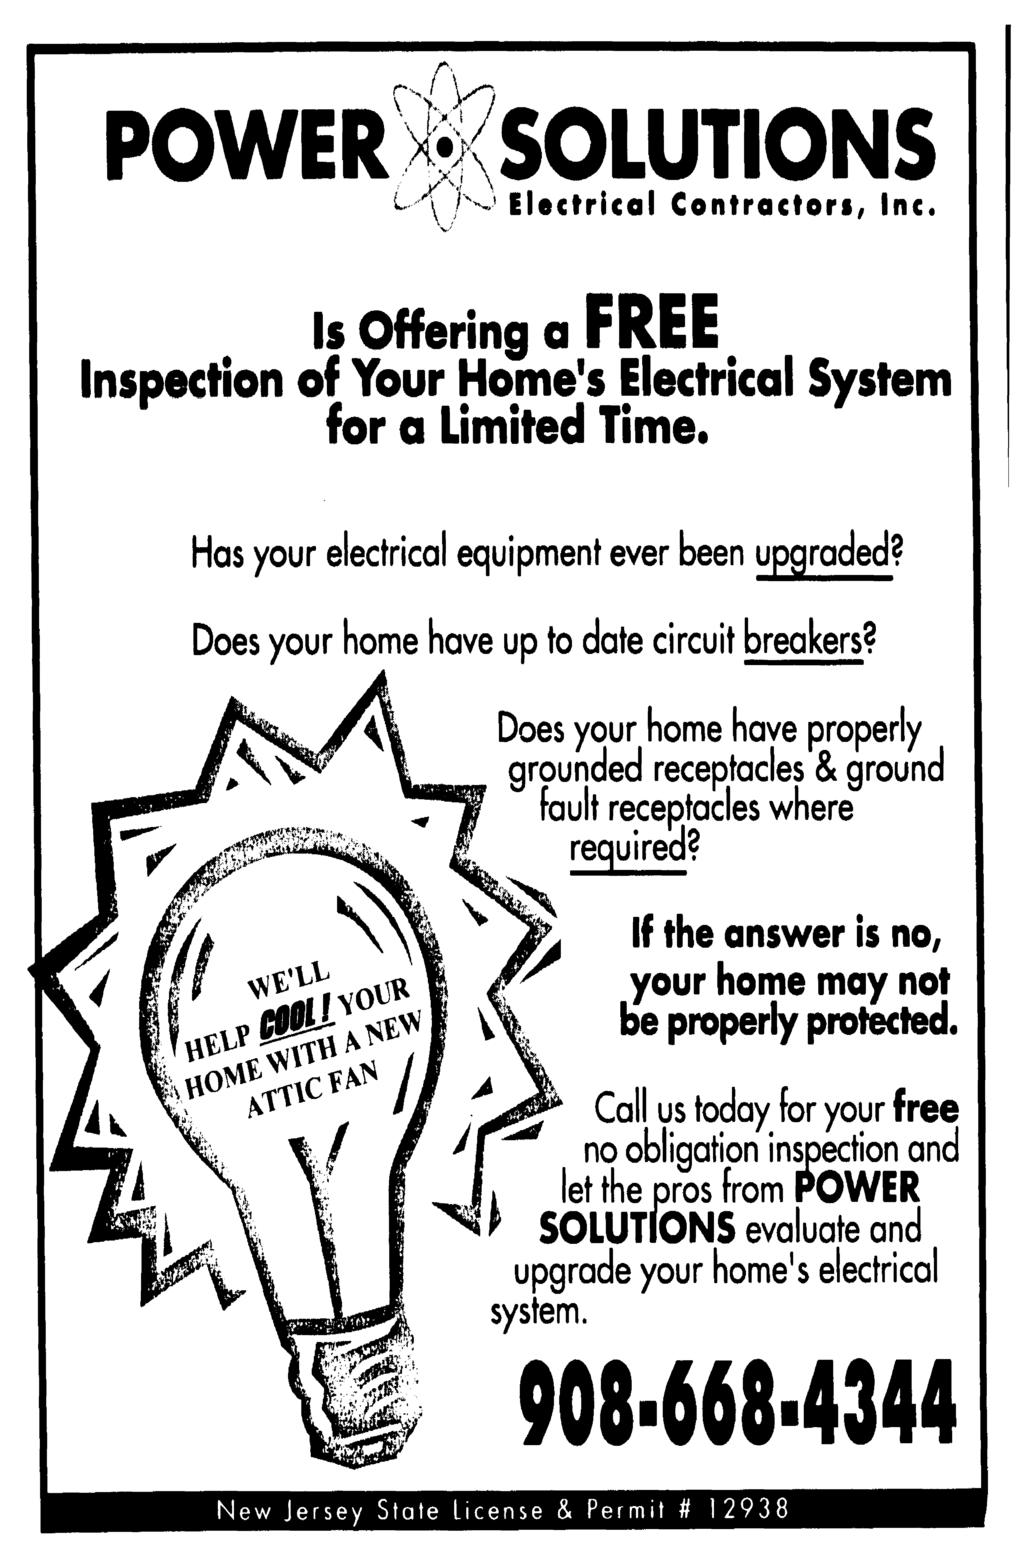 POWER SOLUTONS Electrical Contractors, nc. s Offering a FREE nspection of Your Home's Electrical System for a Limited Time. Has your electrical equipment ever been upgraded?